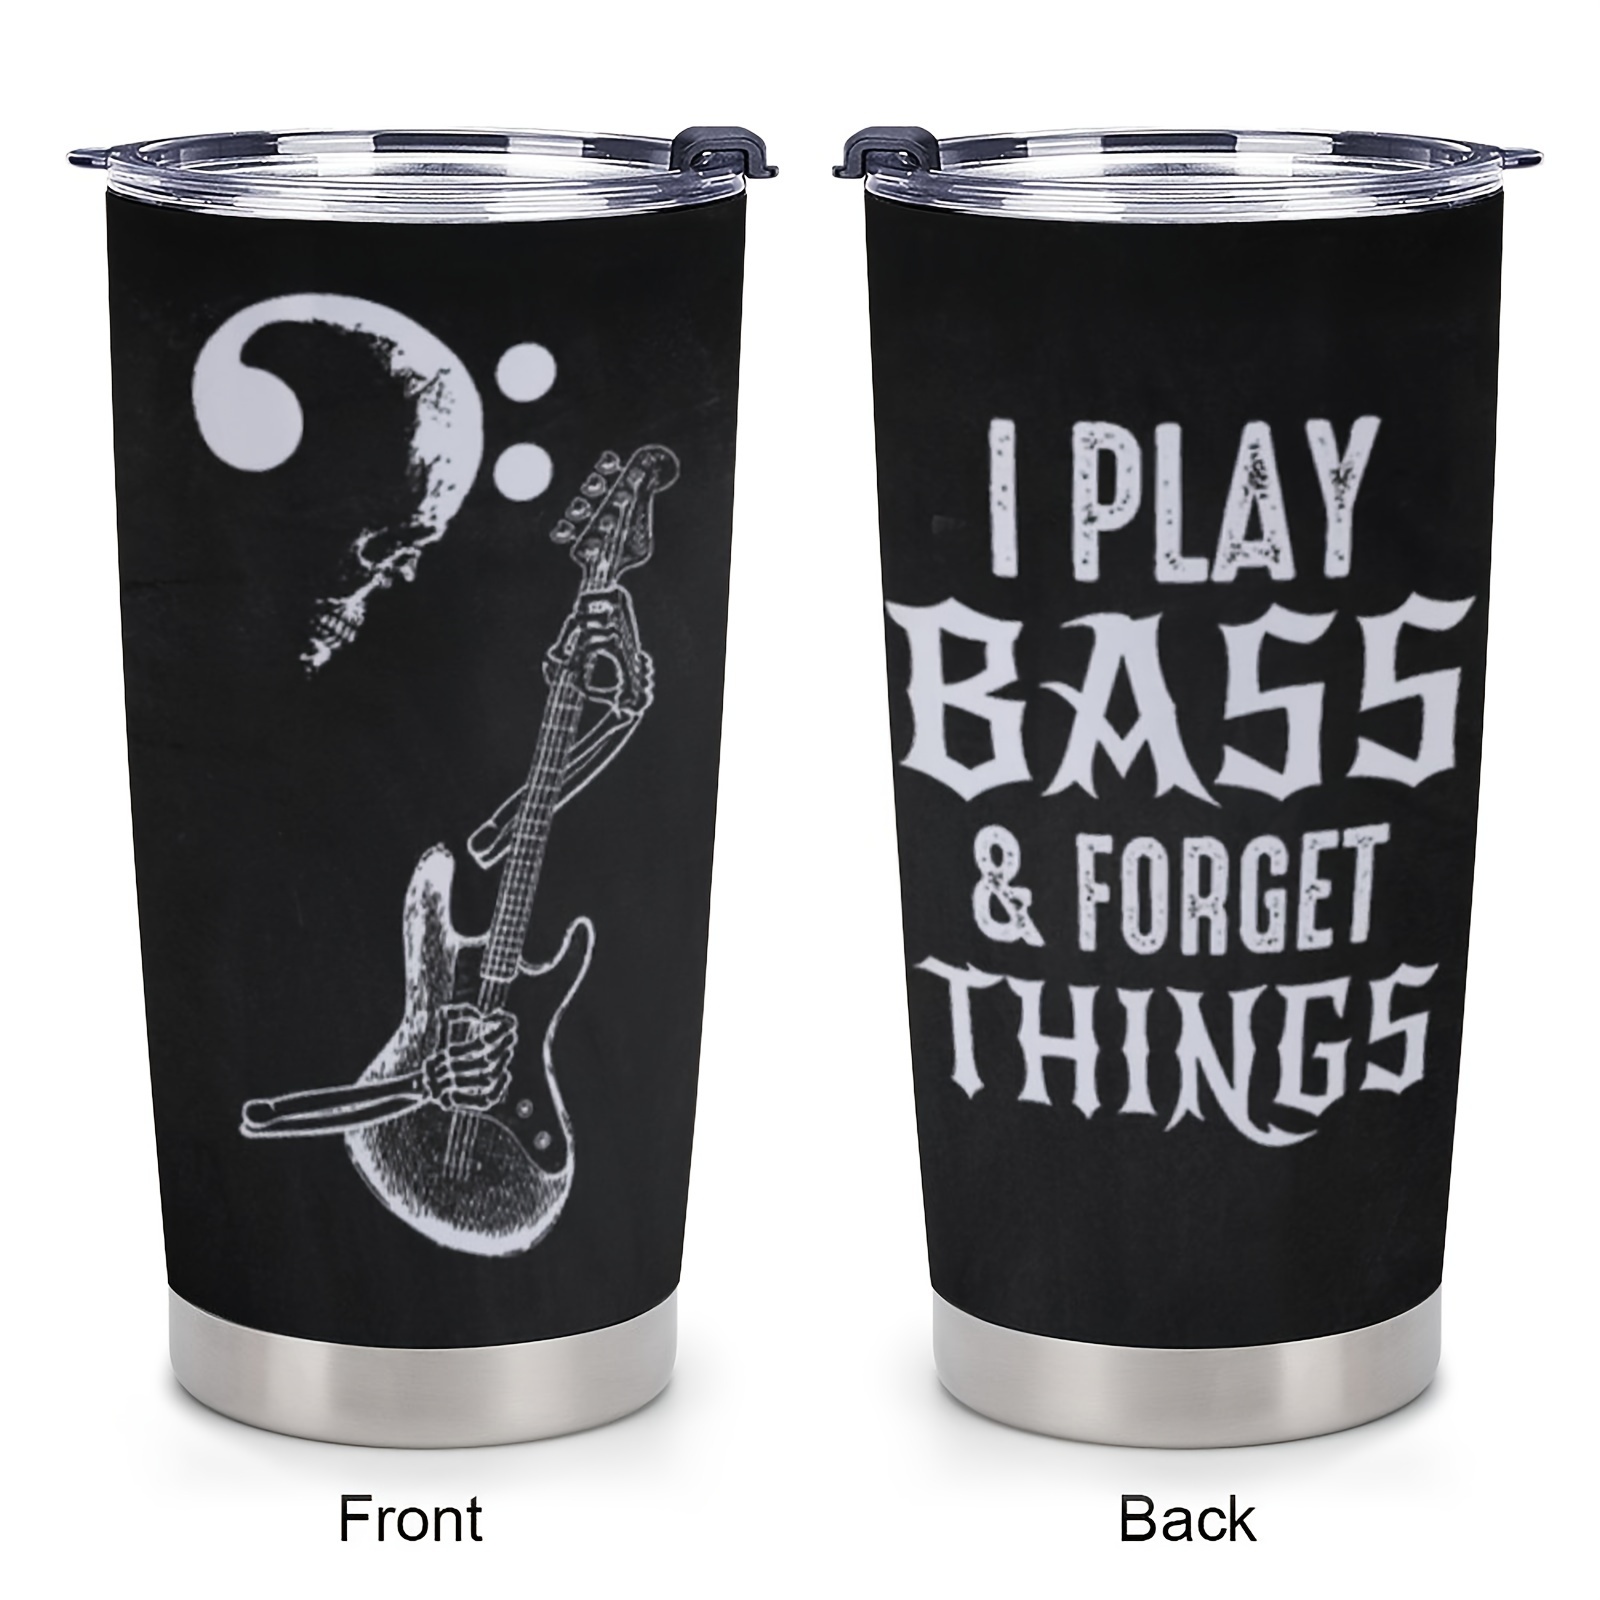 

1pc 20oz, Gifts For Men, Dad, Husband, Friends, Birthday, Fathers Gifts, Skull Playing Guitar Print Tumbler Cup, Insulated Travel Coffee Mug With Lid